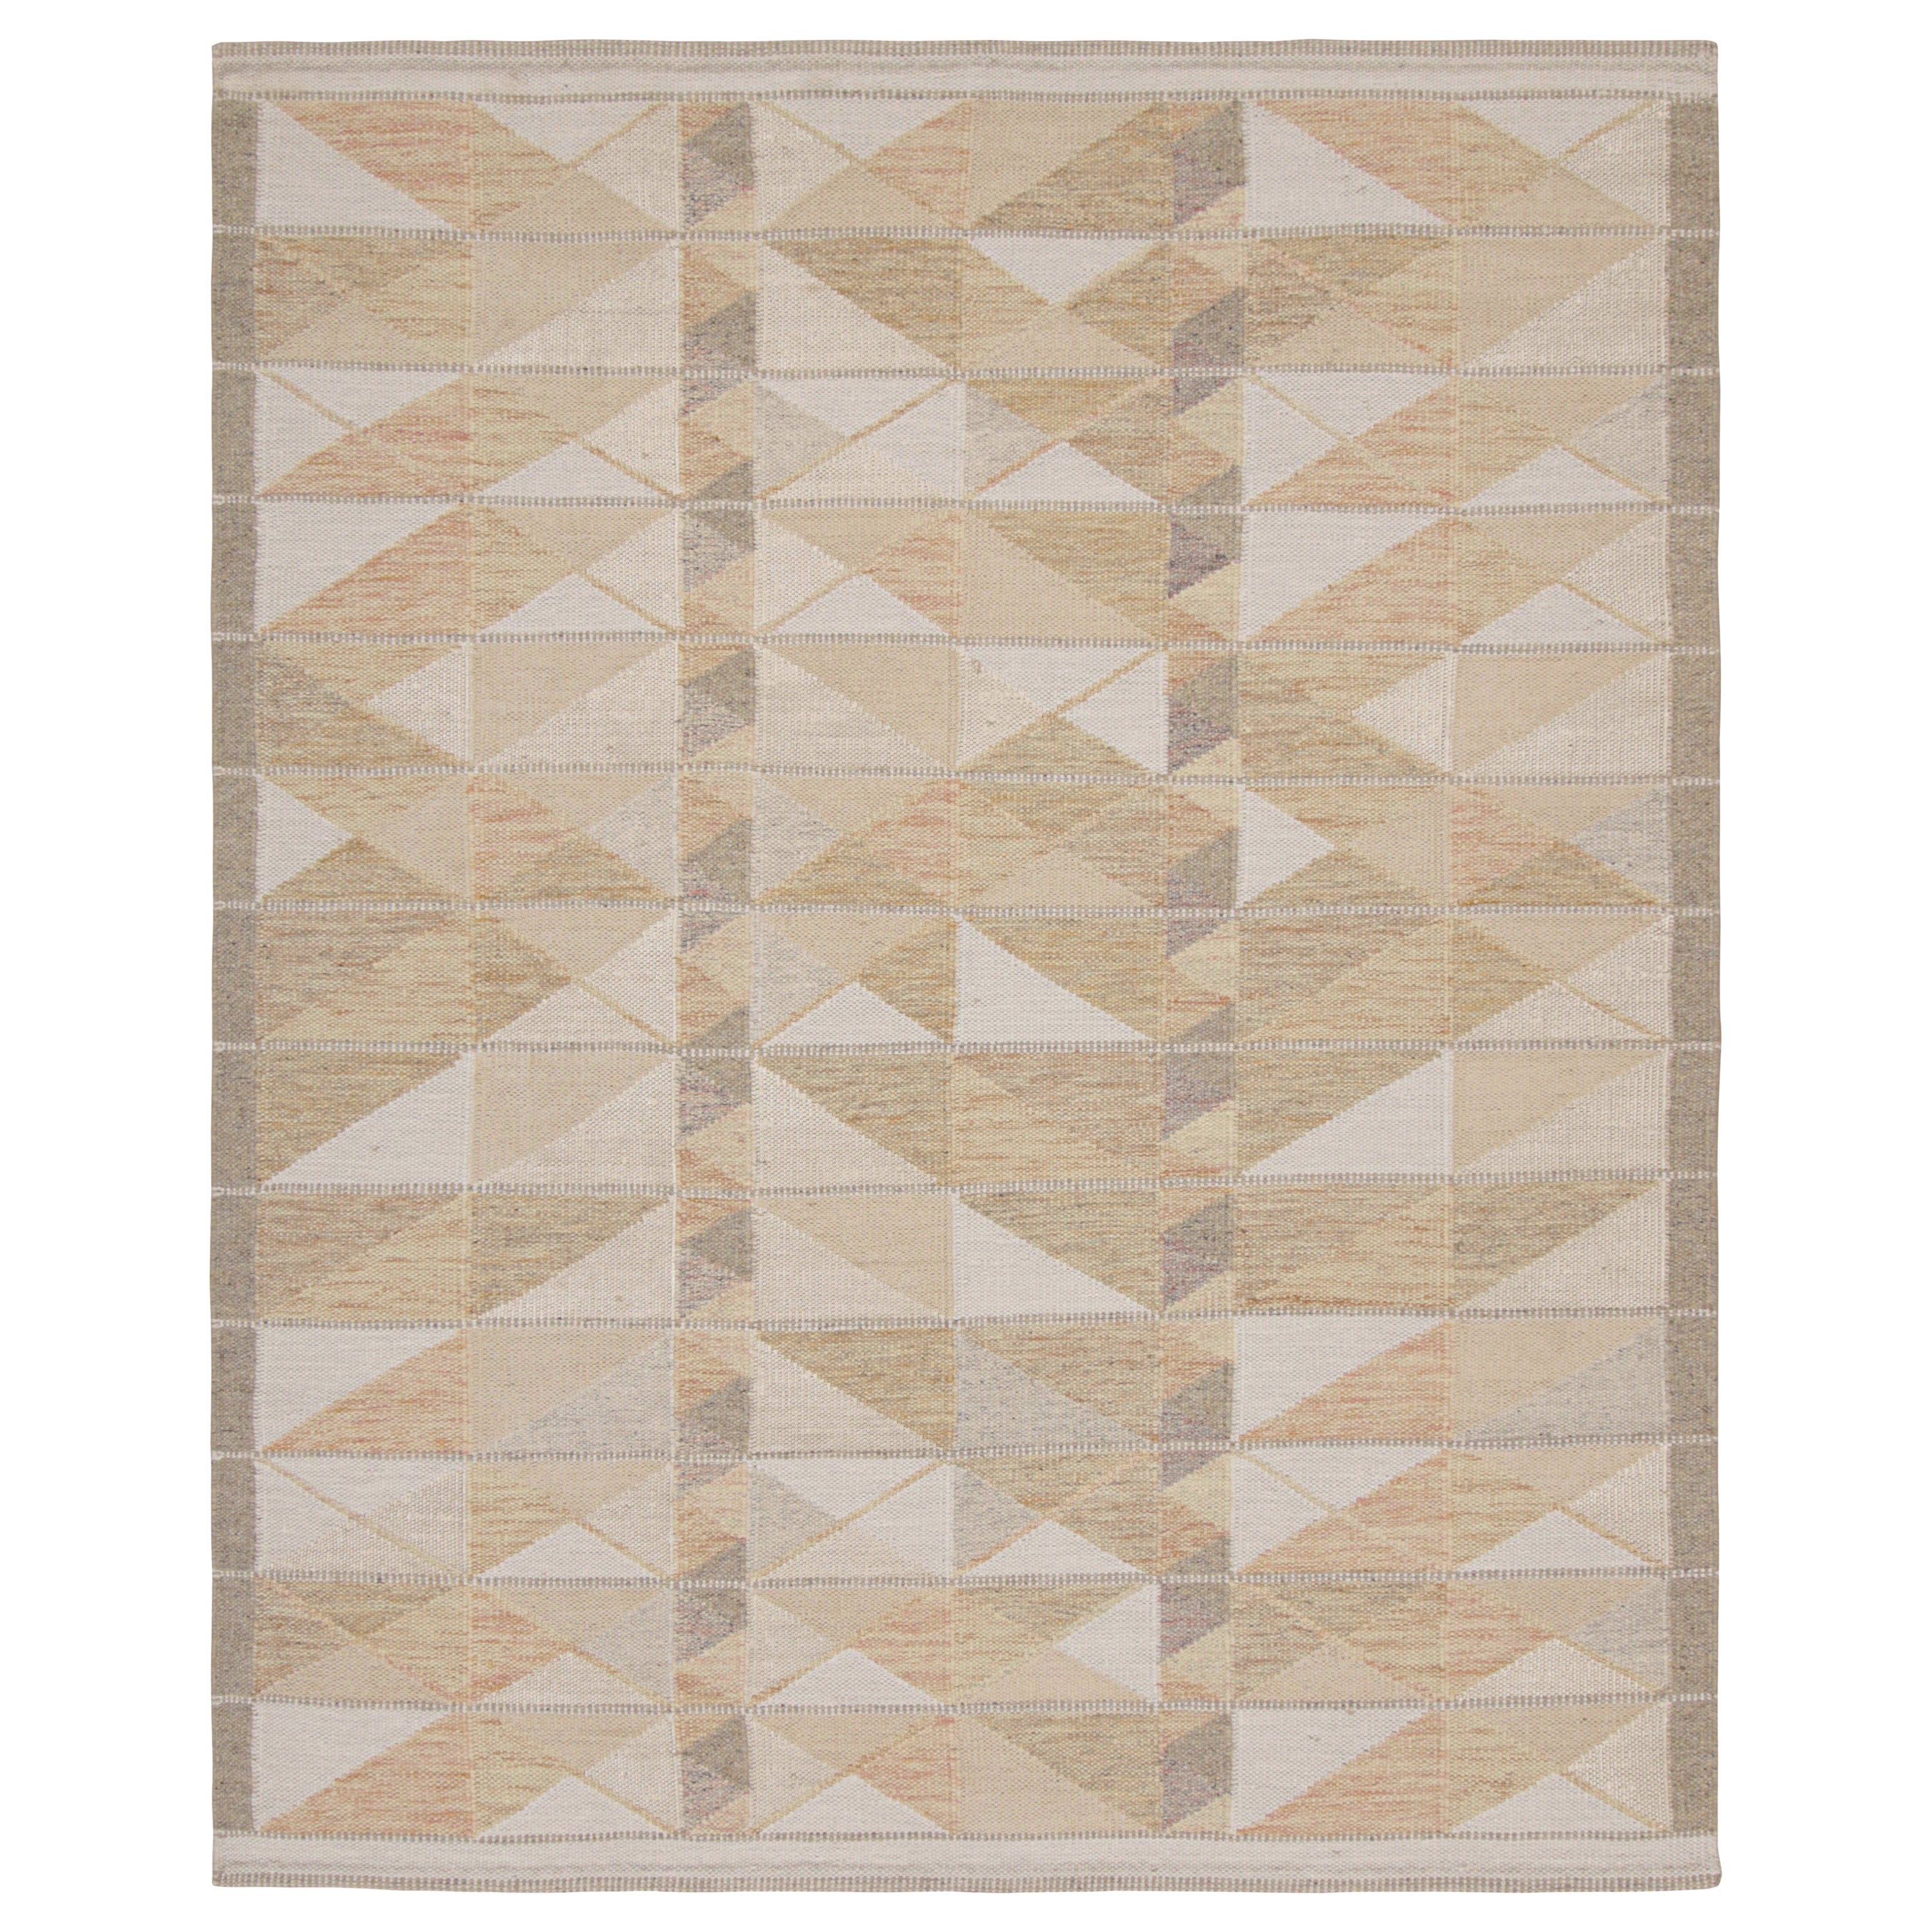 Rug & Kilim’s Scandinavian Style Rug in Beige, Gray and White Geometric Patterns For Sale